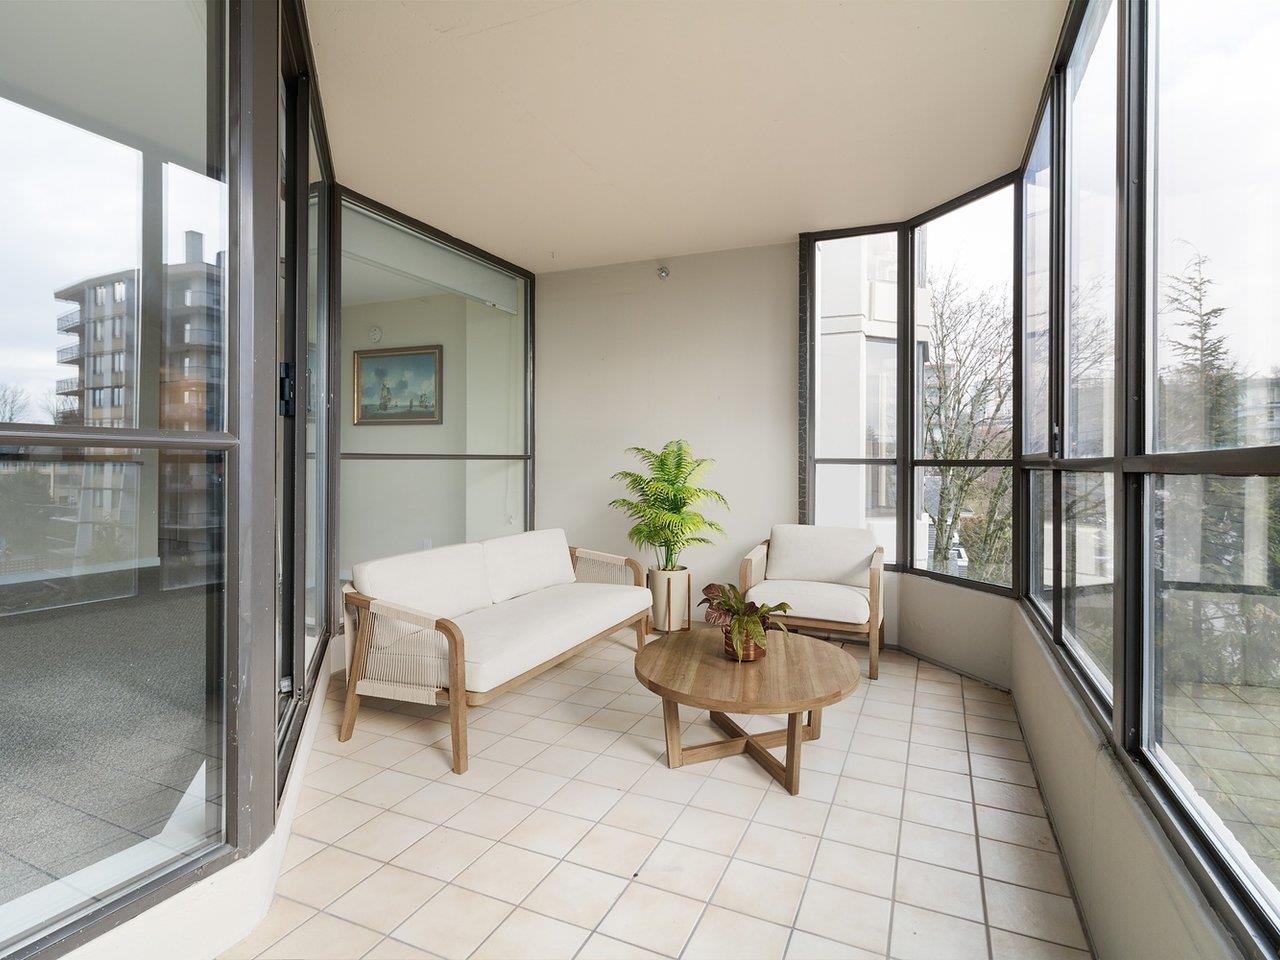 Listing image of 603 505 LONSDALE AVENUE